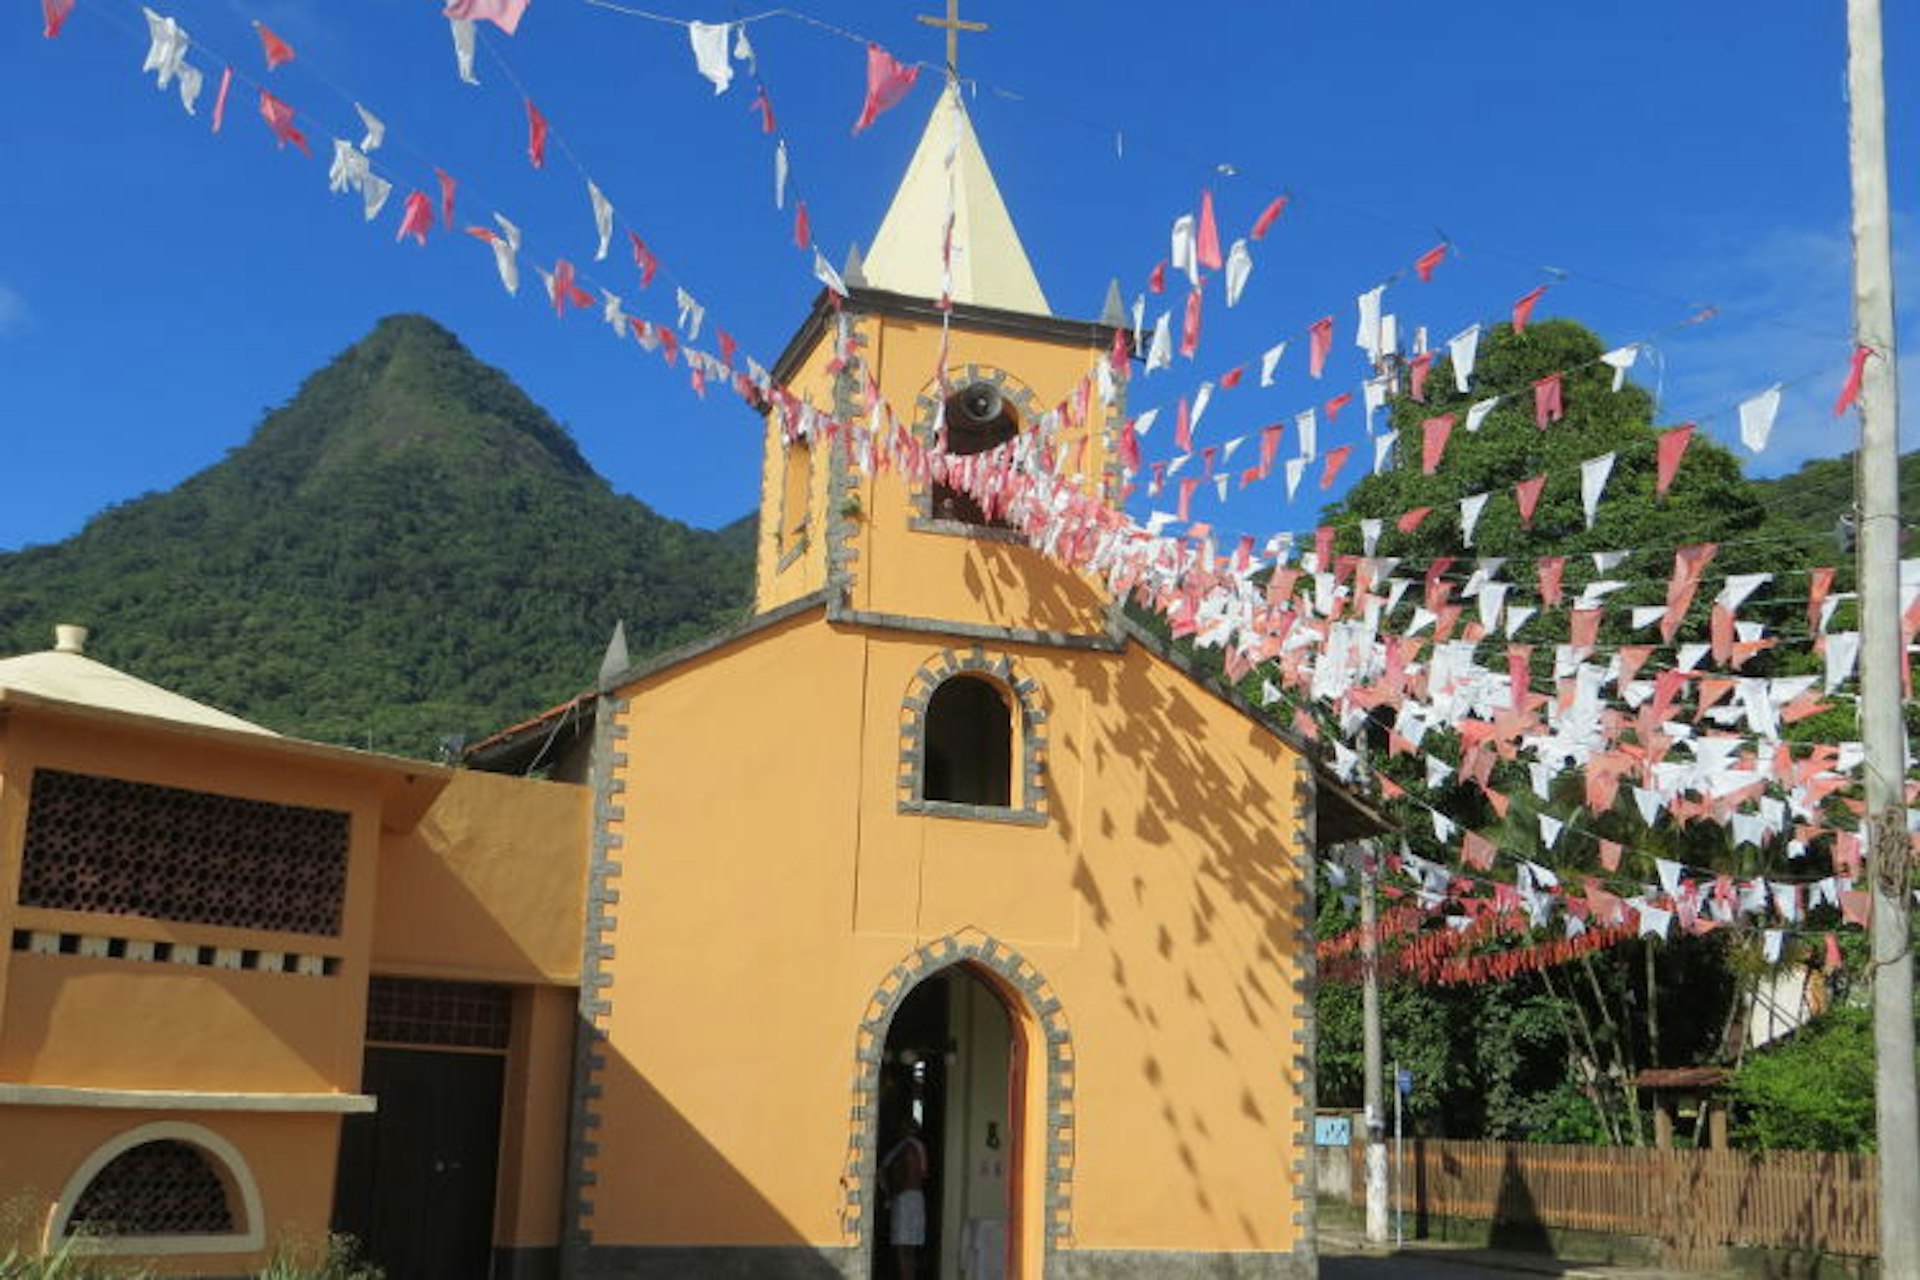 Town church with pre-Carnaval decorations, Vila do Abraão. Image by Gregor Clark / Lonely Planet